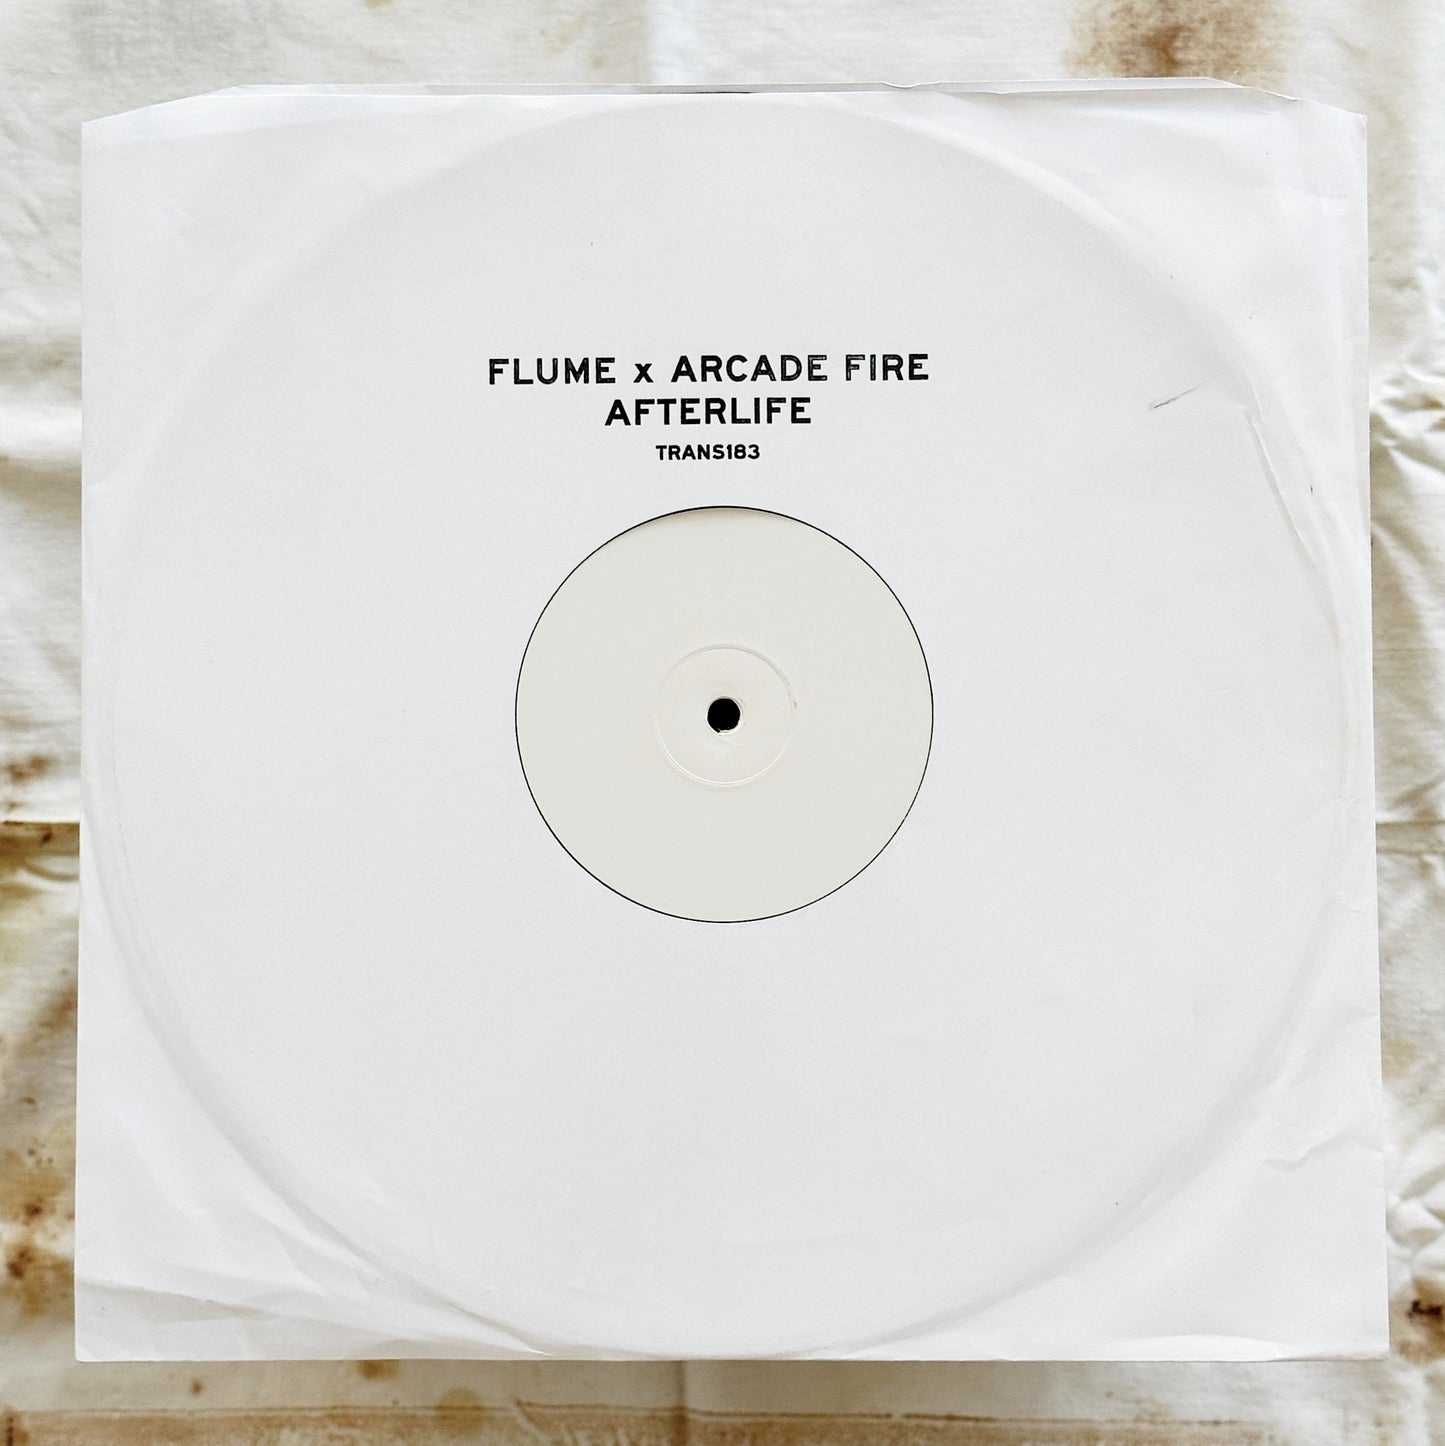 Flume X Arcade Fire / Afterlife White Label 12" Single